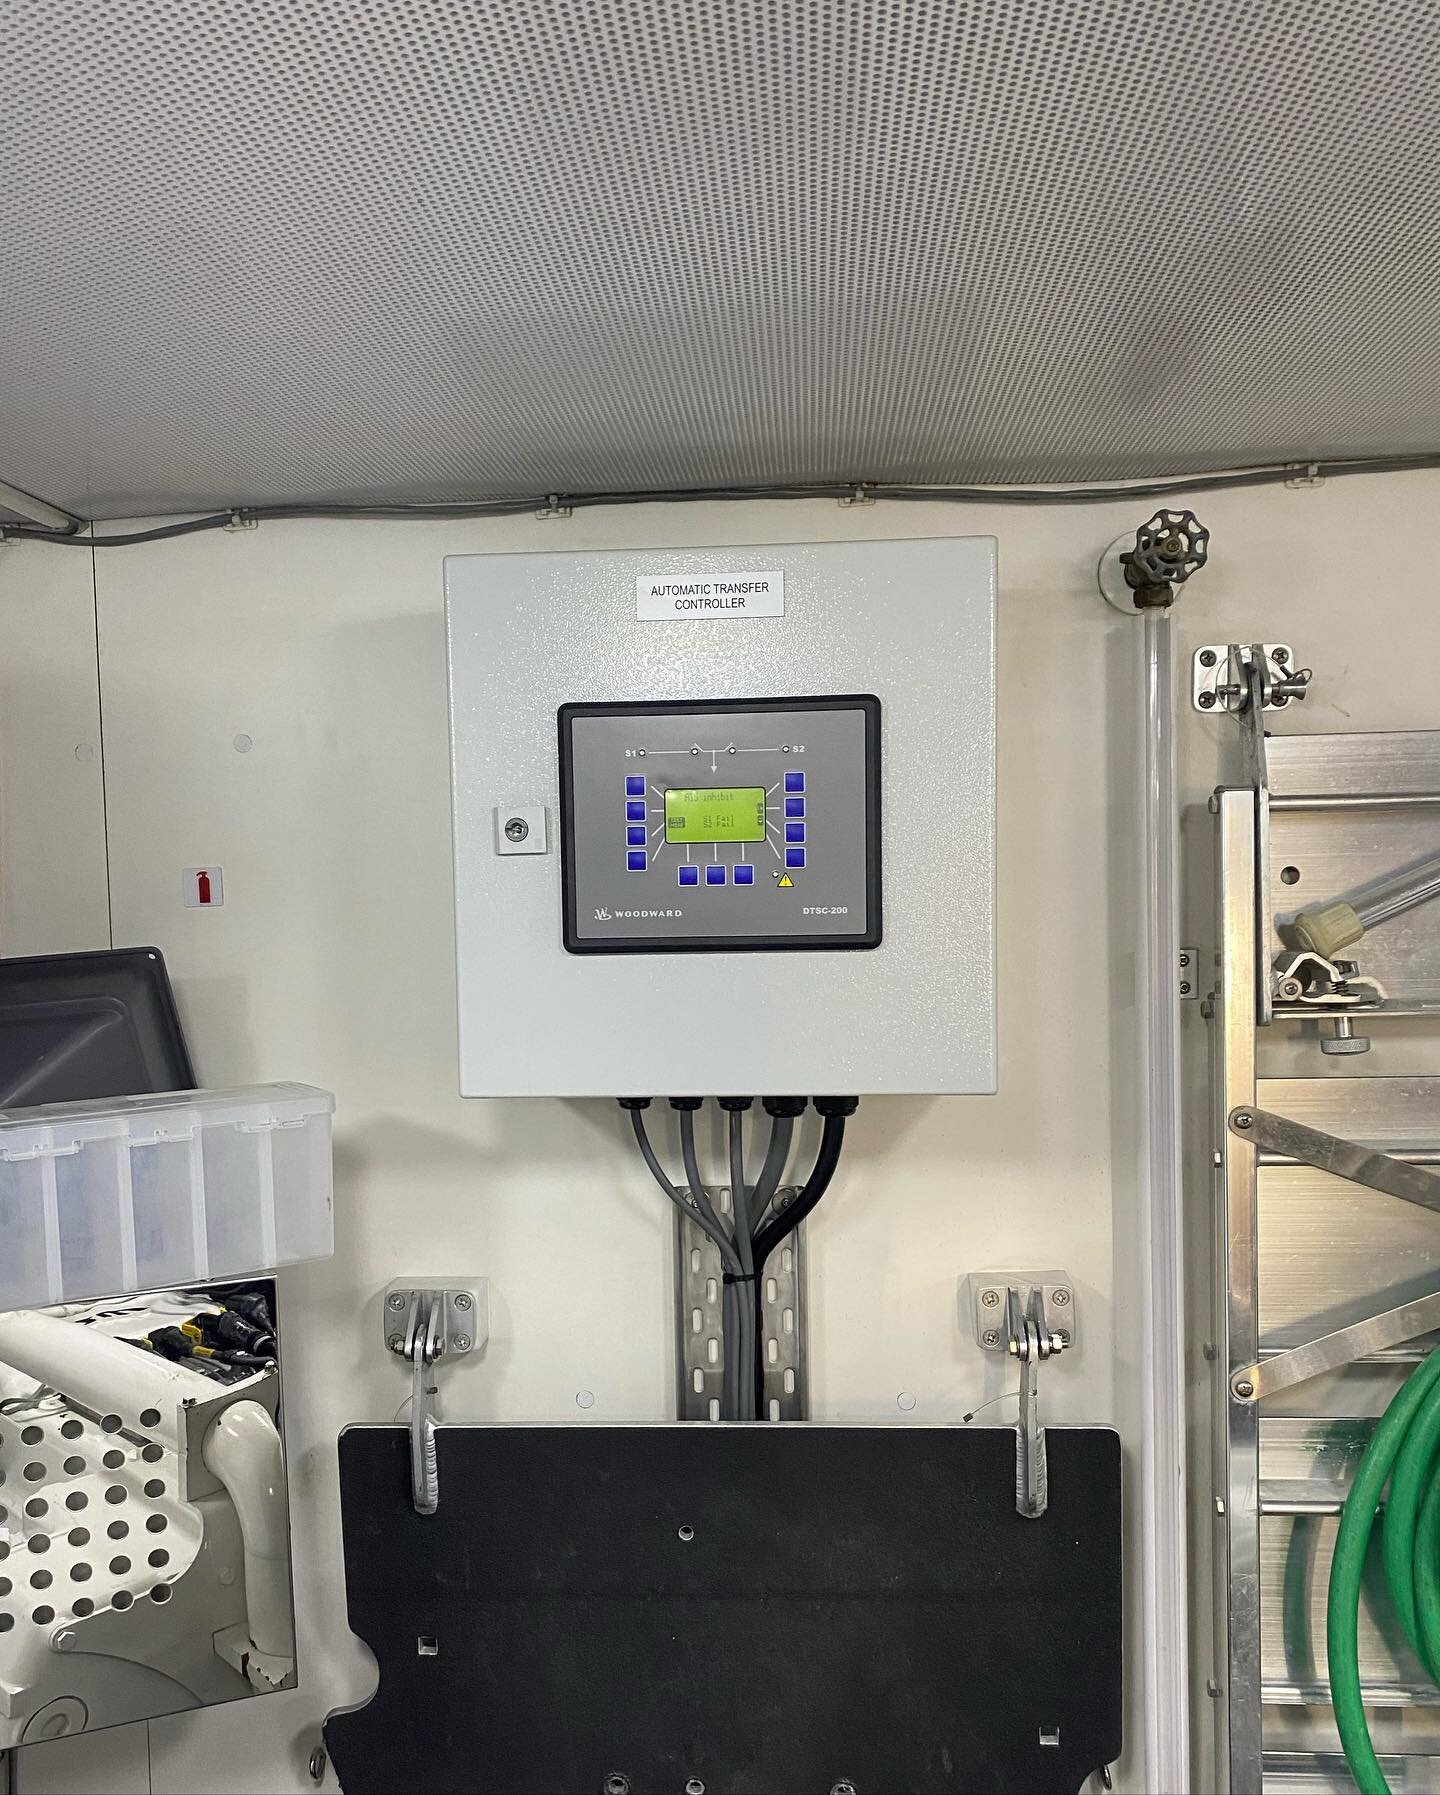 We completed the design, programming and build for this Woodward DTSC200 automatic transfer switch on a large pleasure vessel we service. The system can compete an automated closed transition between sources of supply, to avoid blacking out the vesse